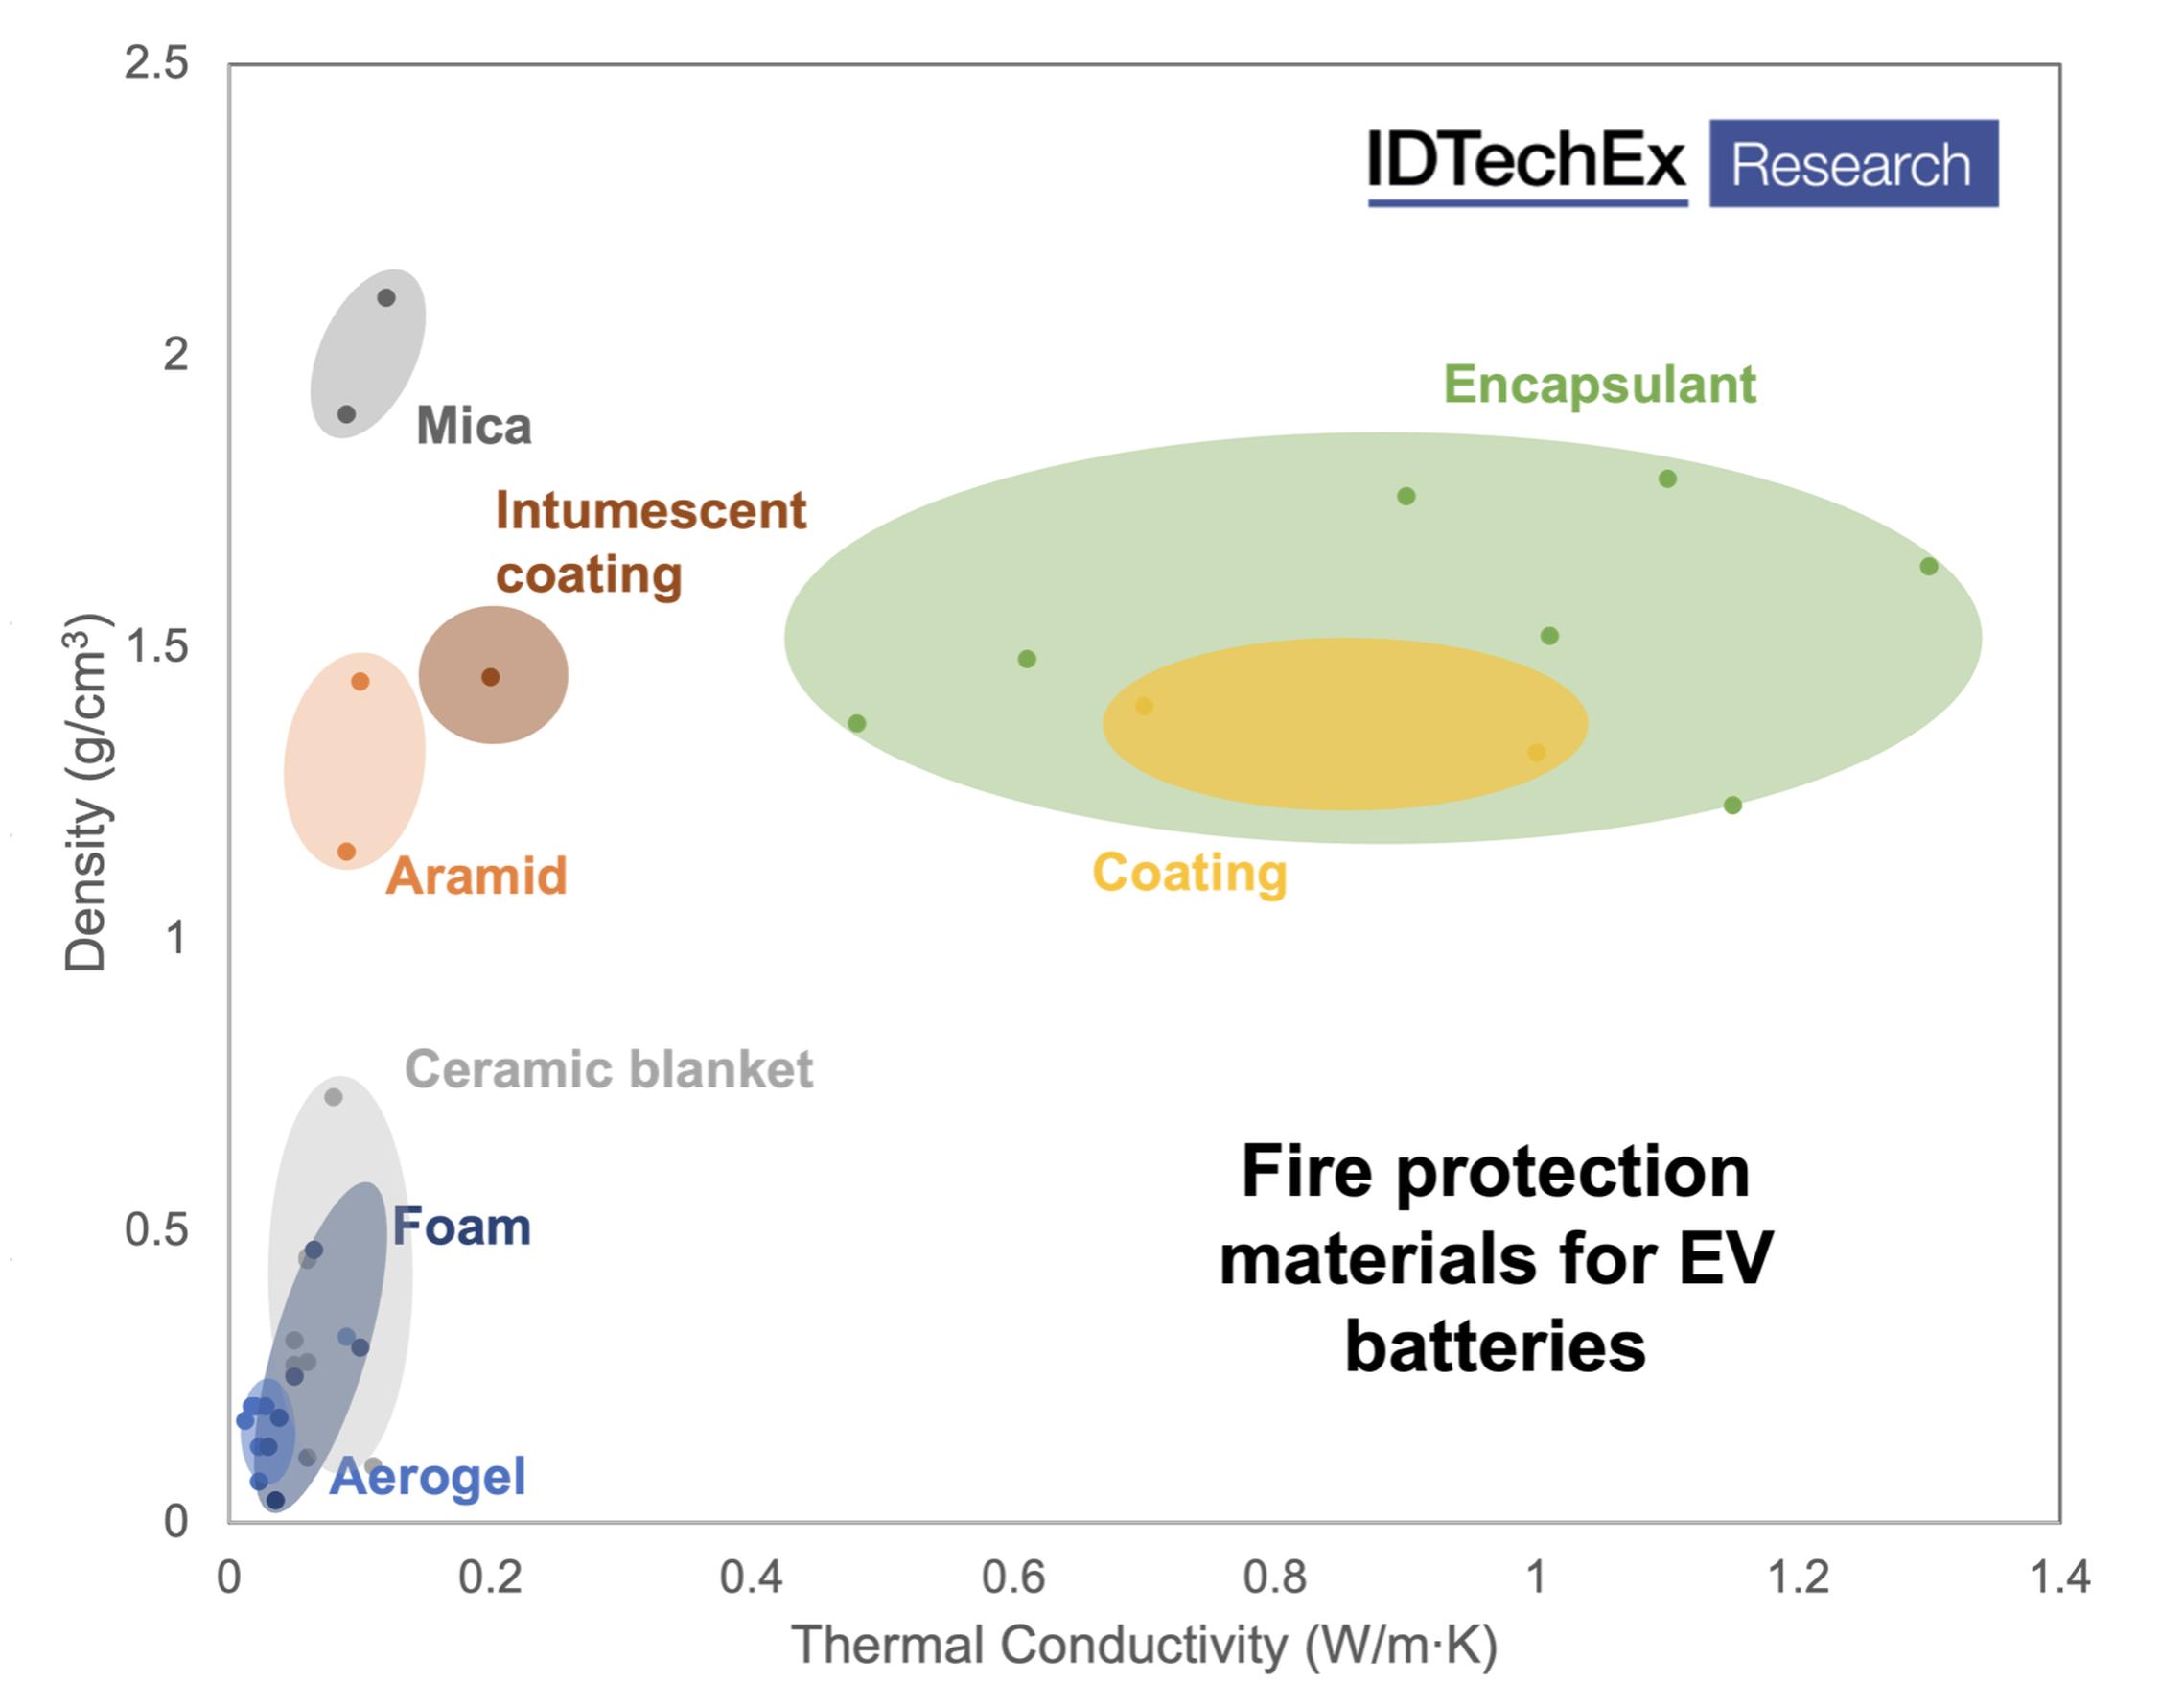 Vehicles are the next big opportunity for fire protection materials